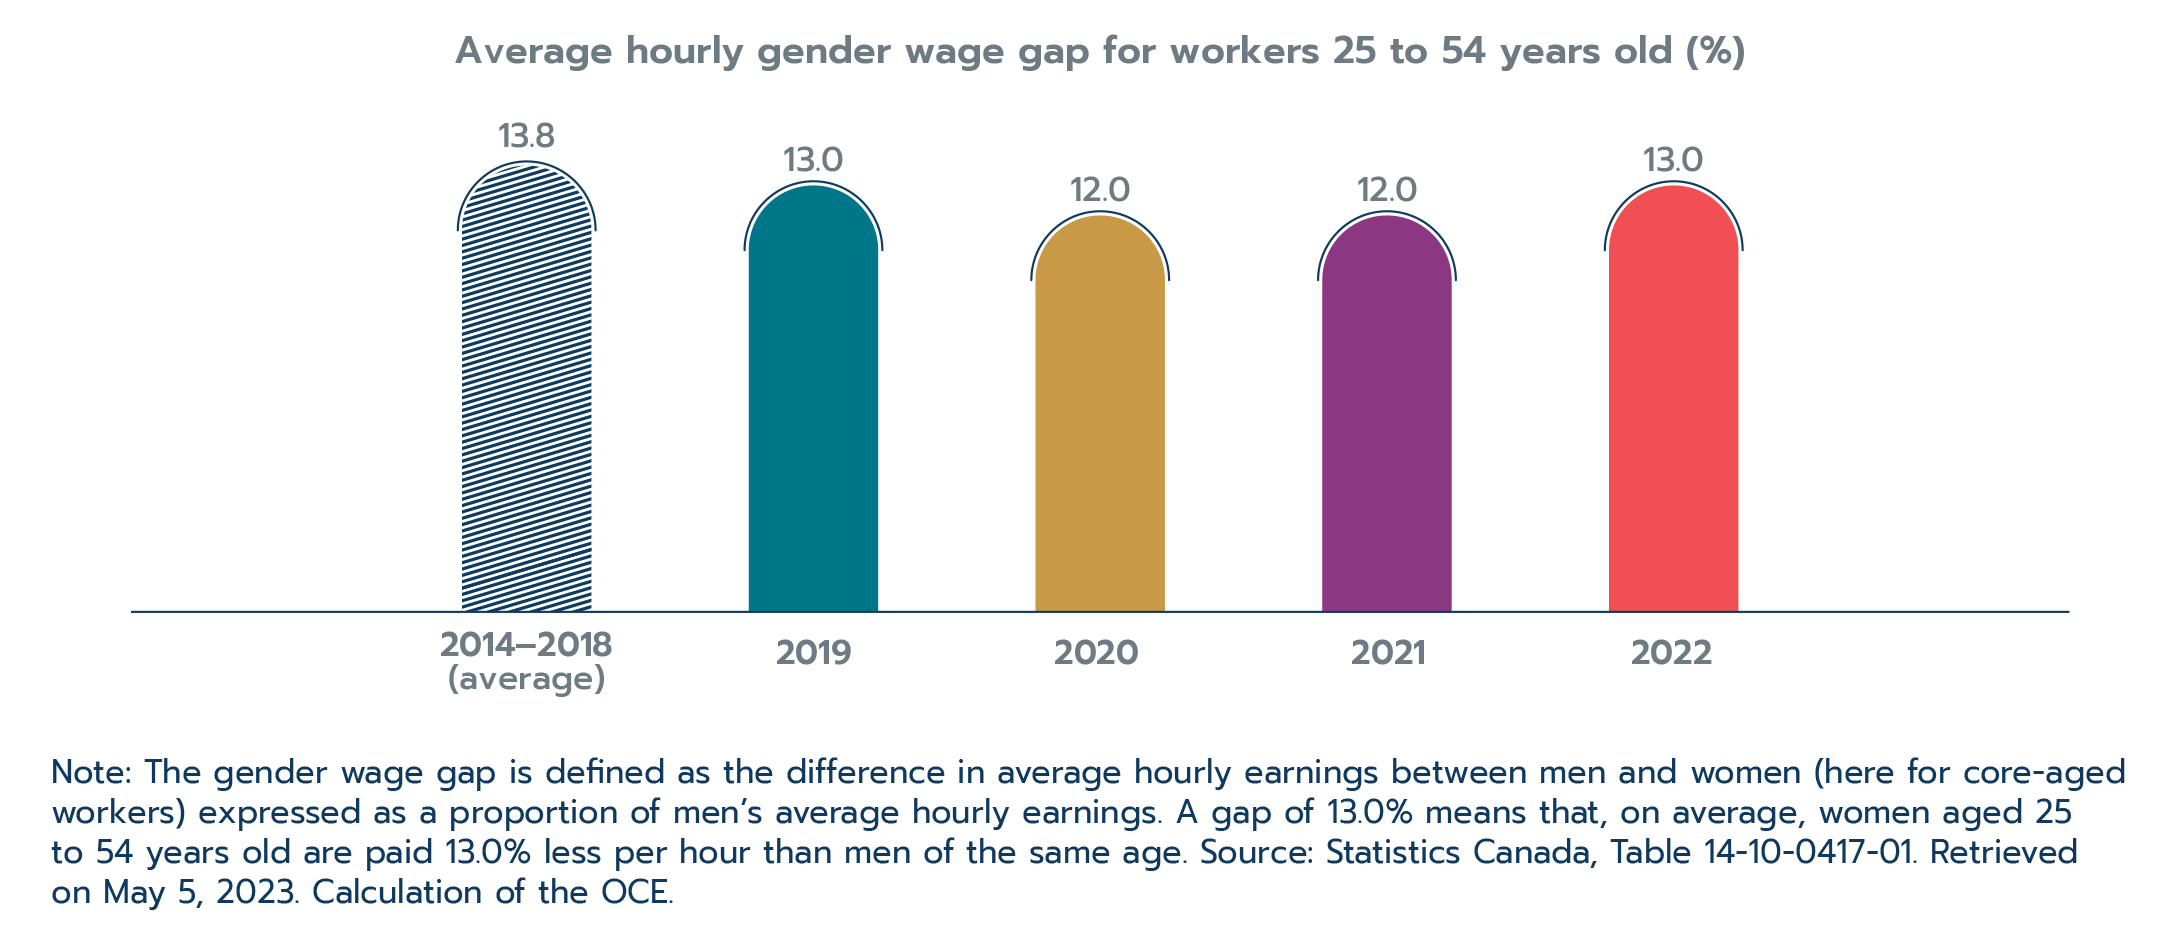 Figure 1.7: The gender wage gap has not improved compared to 2019 despite changes in female labour market participation and occupational shifts